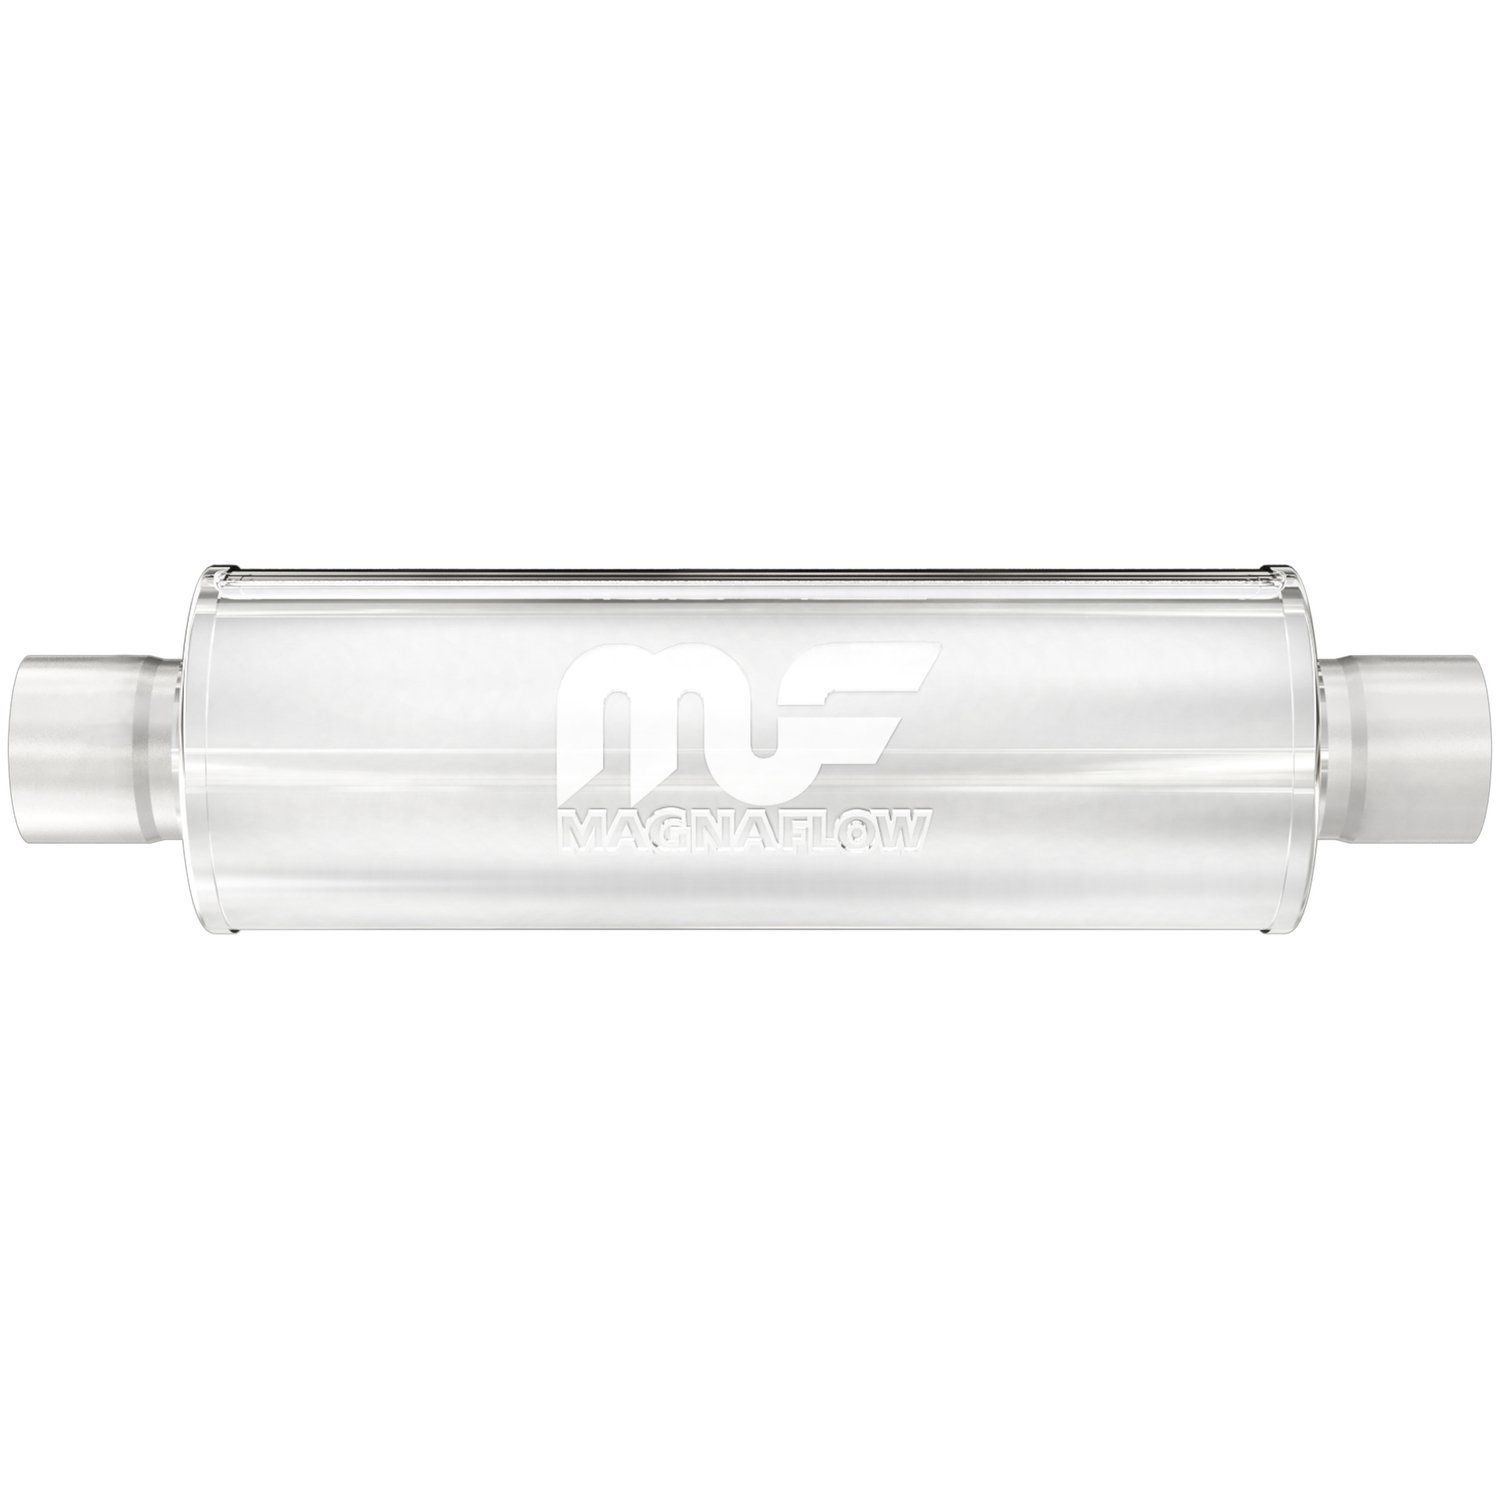 4" Round Muffler Center In/Center Out: 2.5" Body Length: 22" Overall Length: 28" Core Size: 2.5" Satin Finish